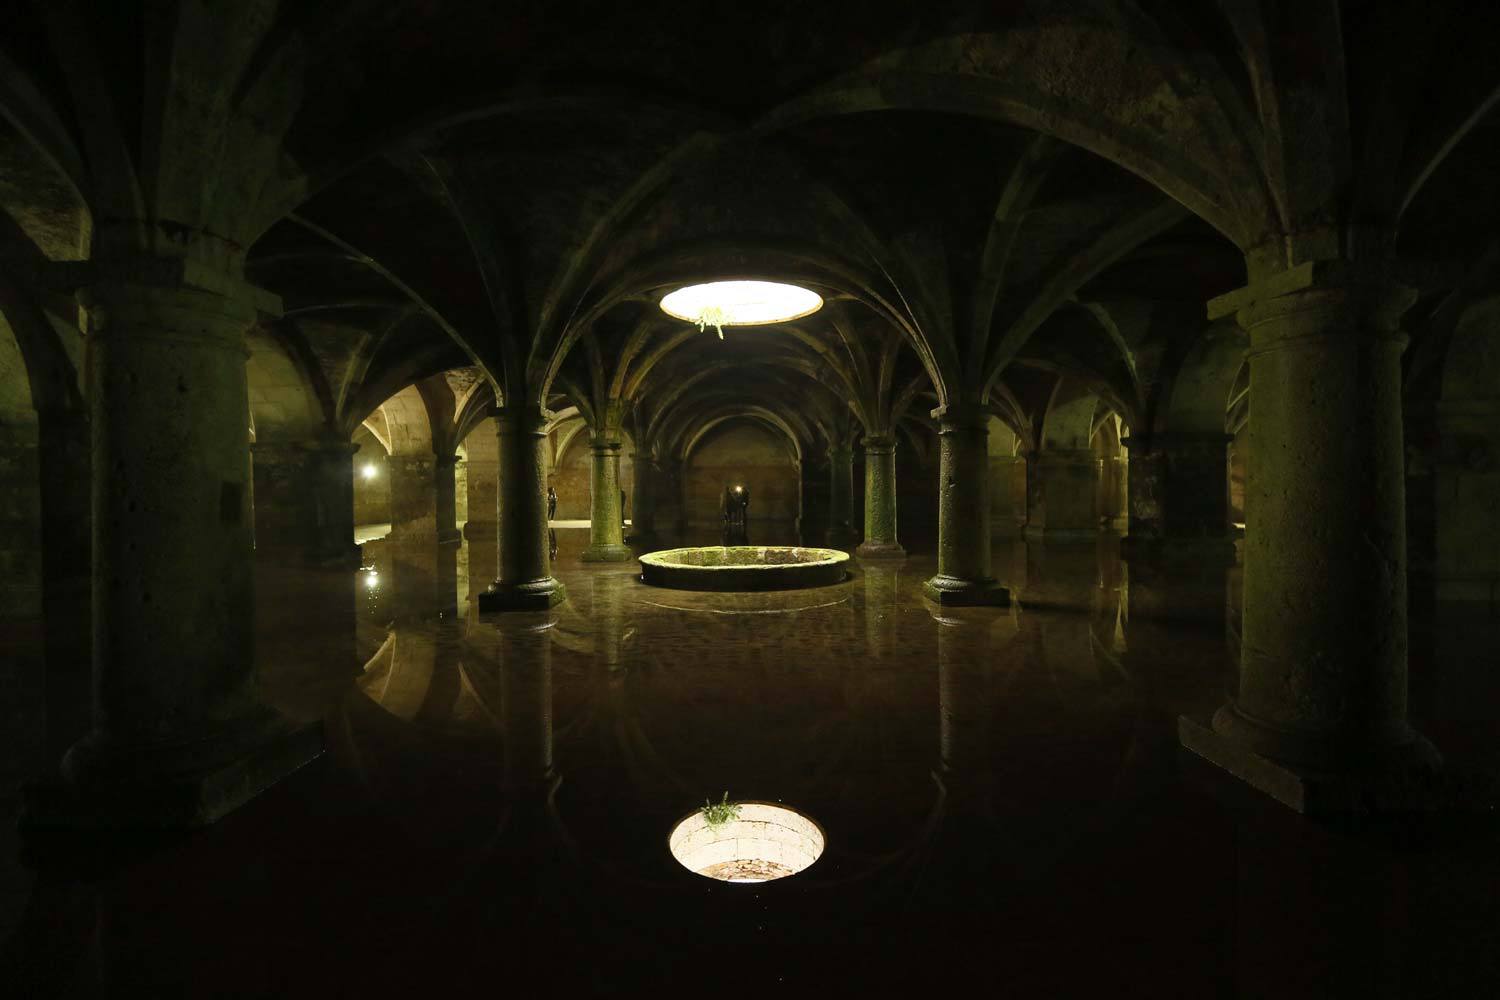 Cistern - Interior view toward the skylight, reflected in the water below